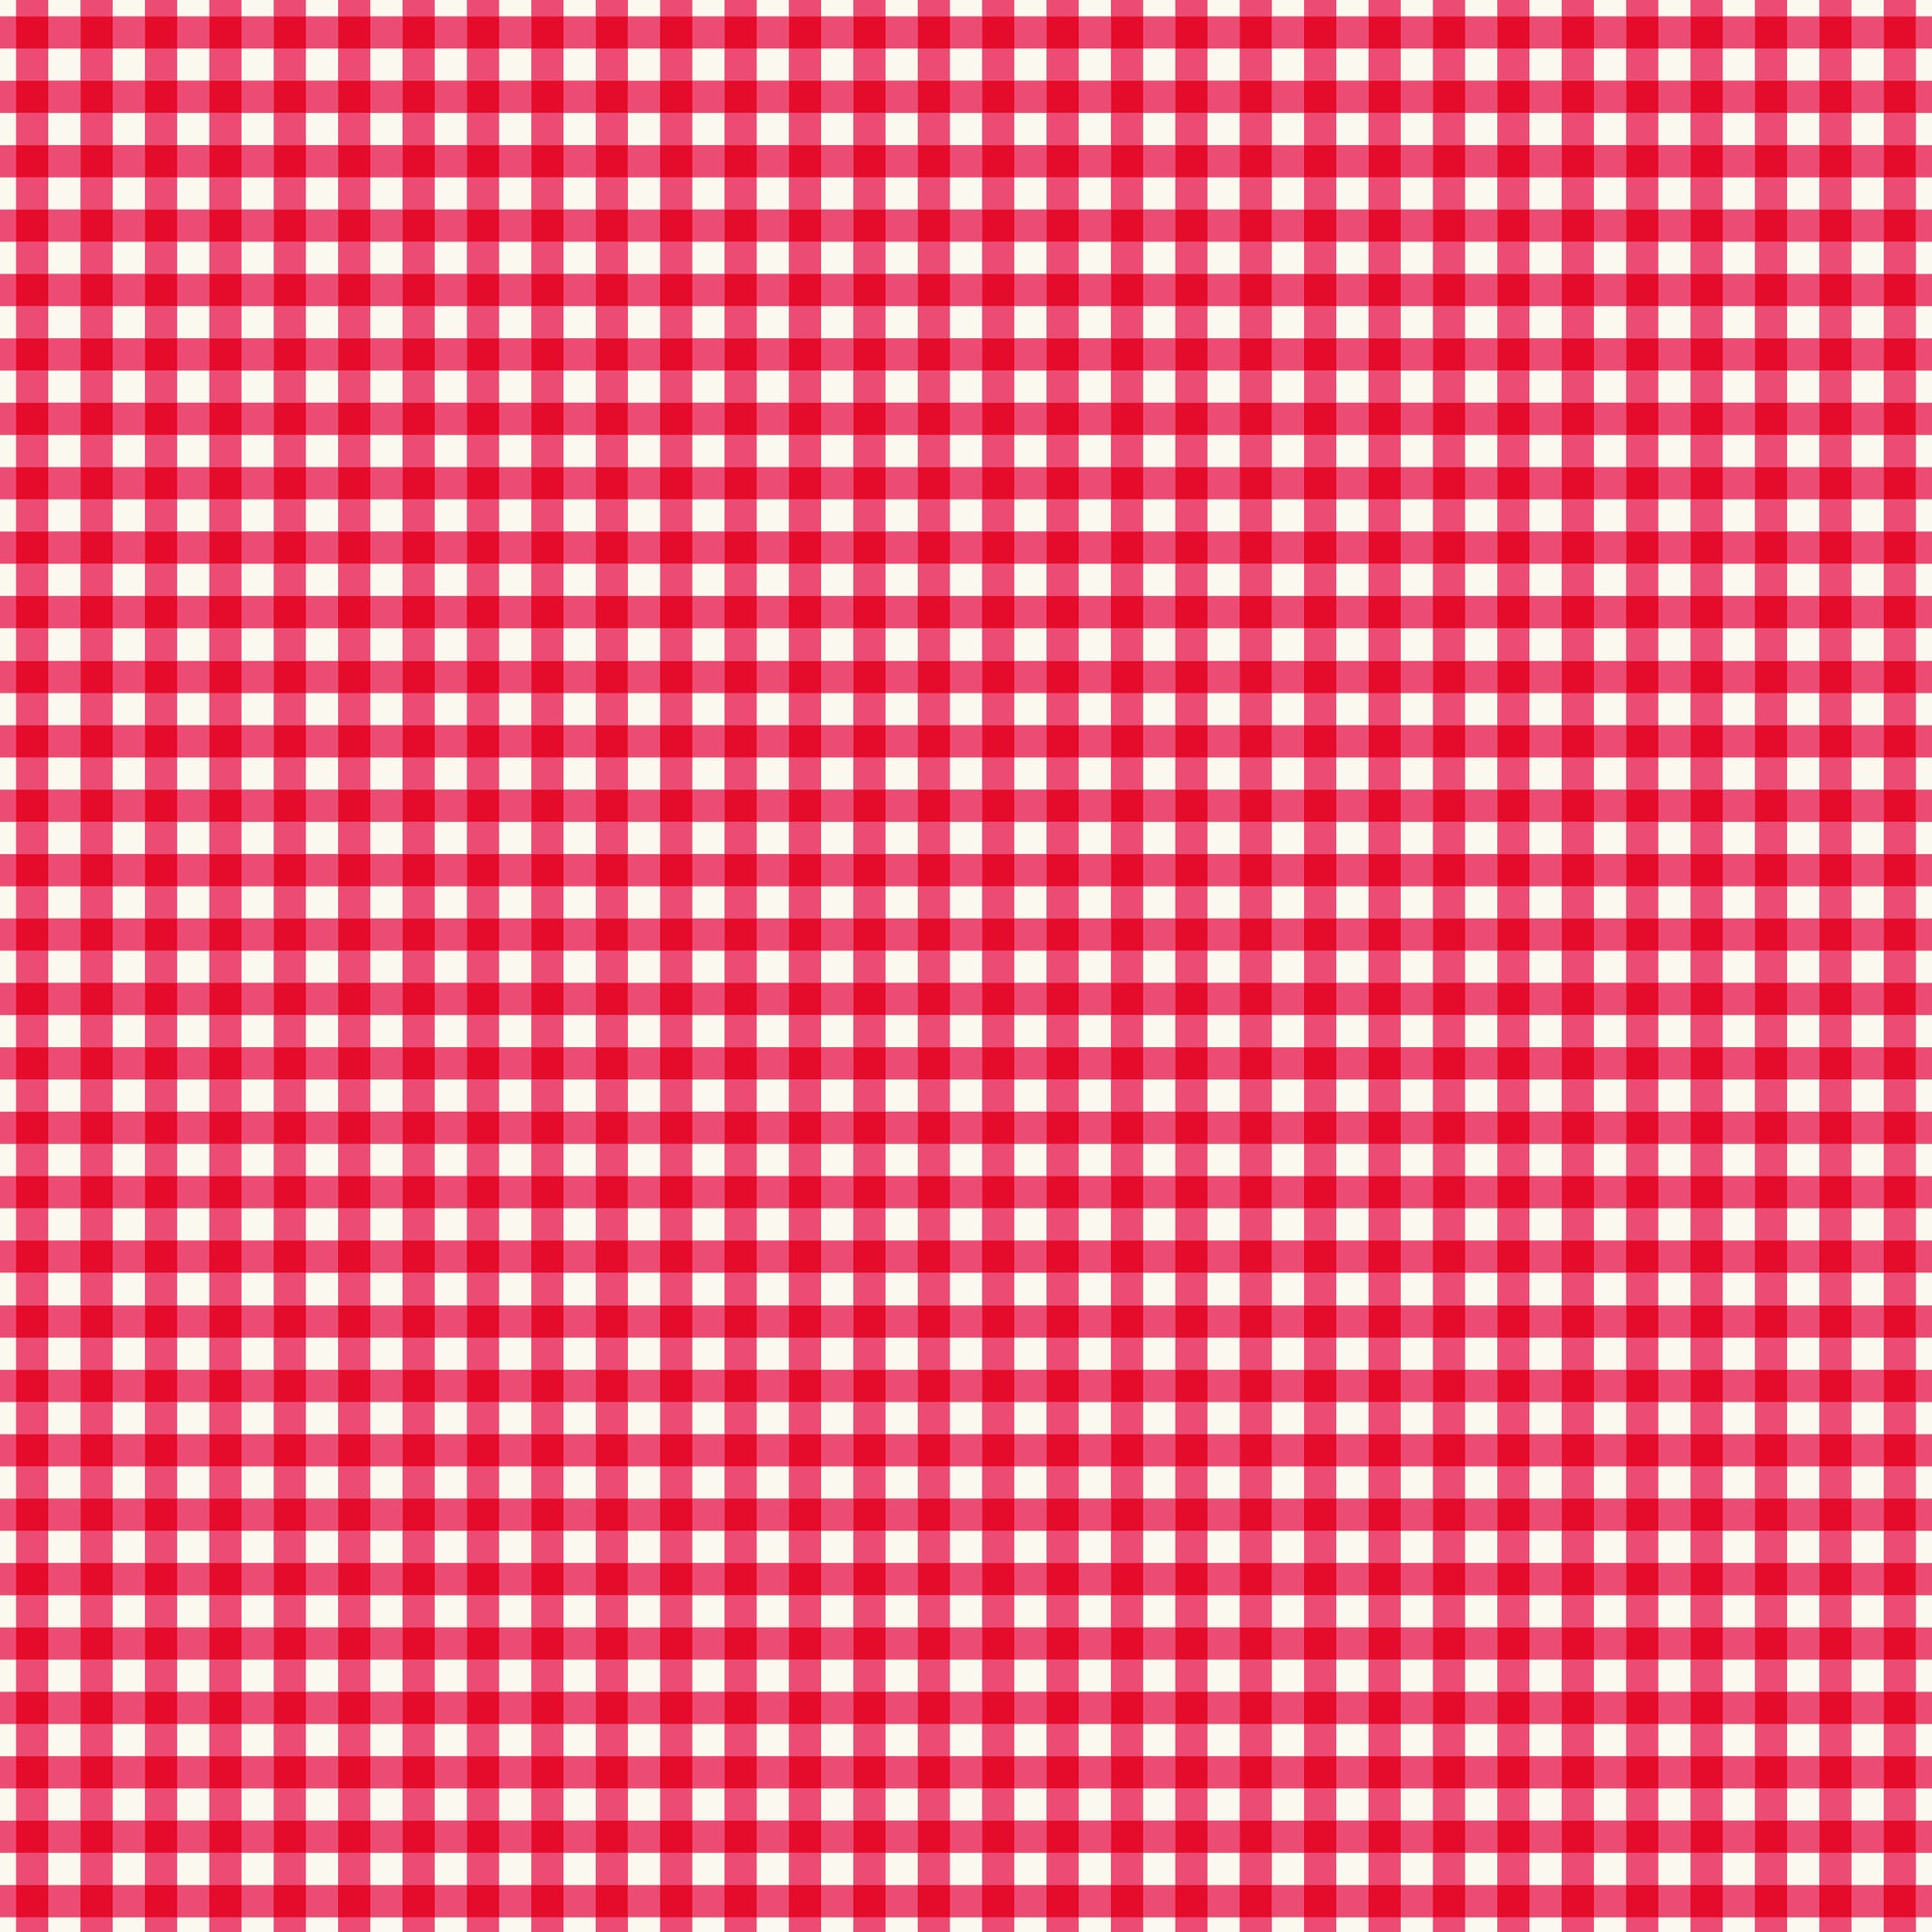 Picnic Florals Gingham - Red - Yardage